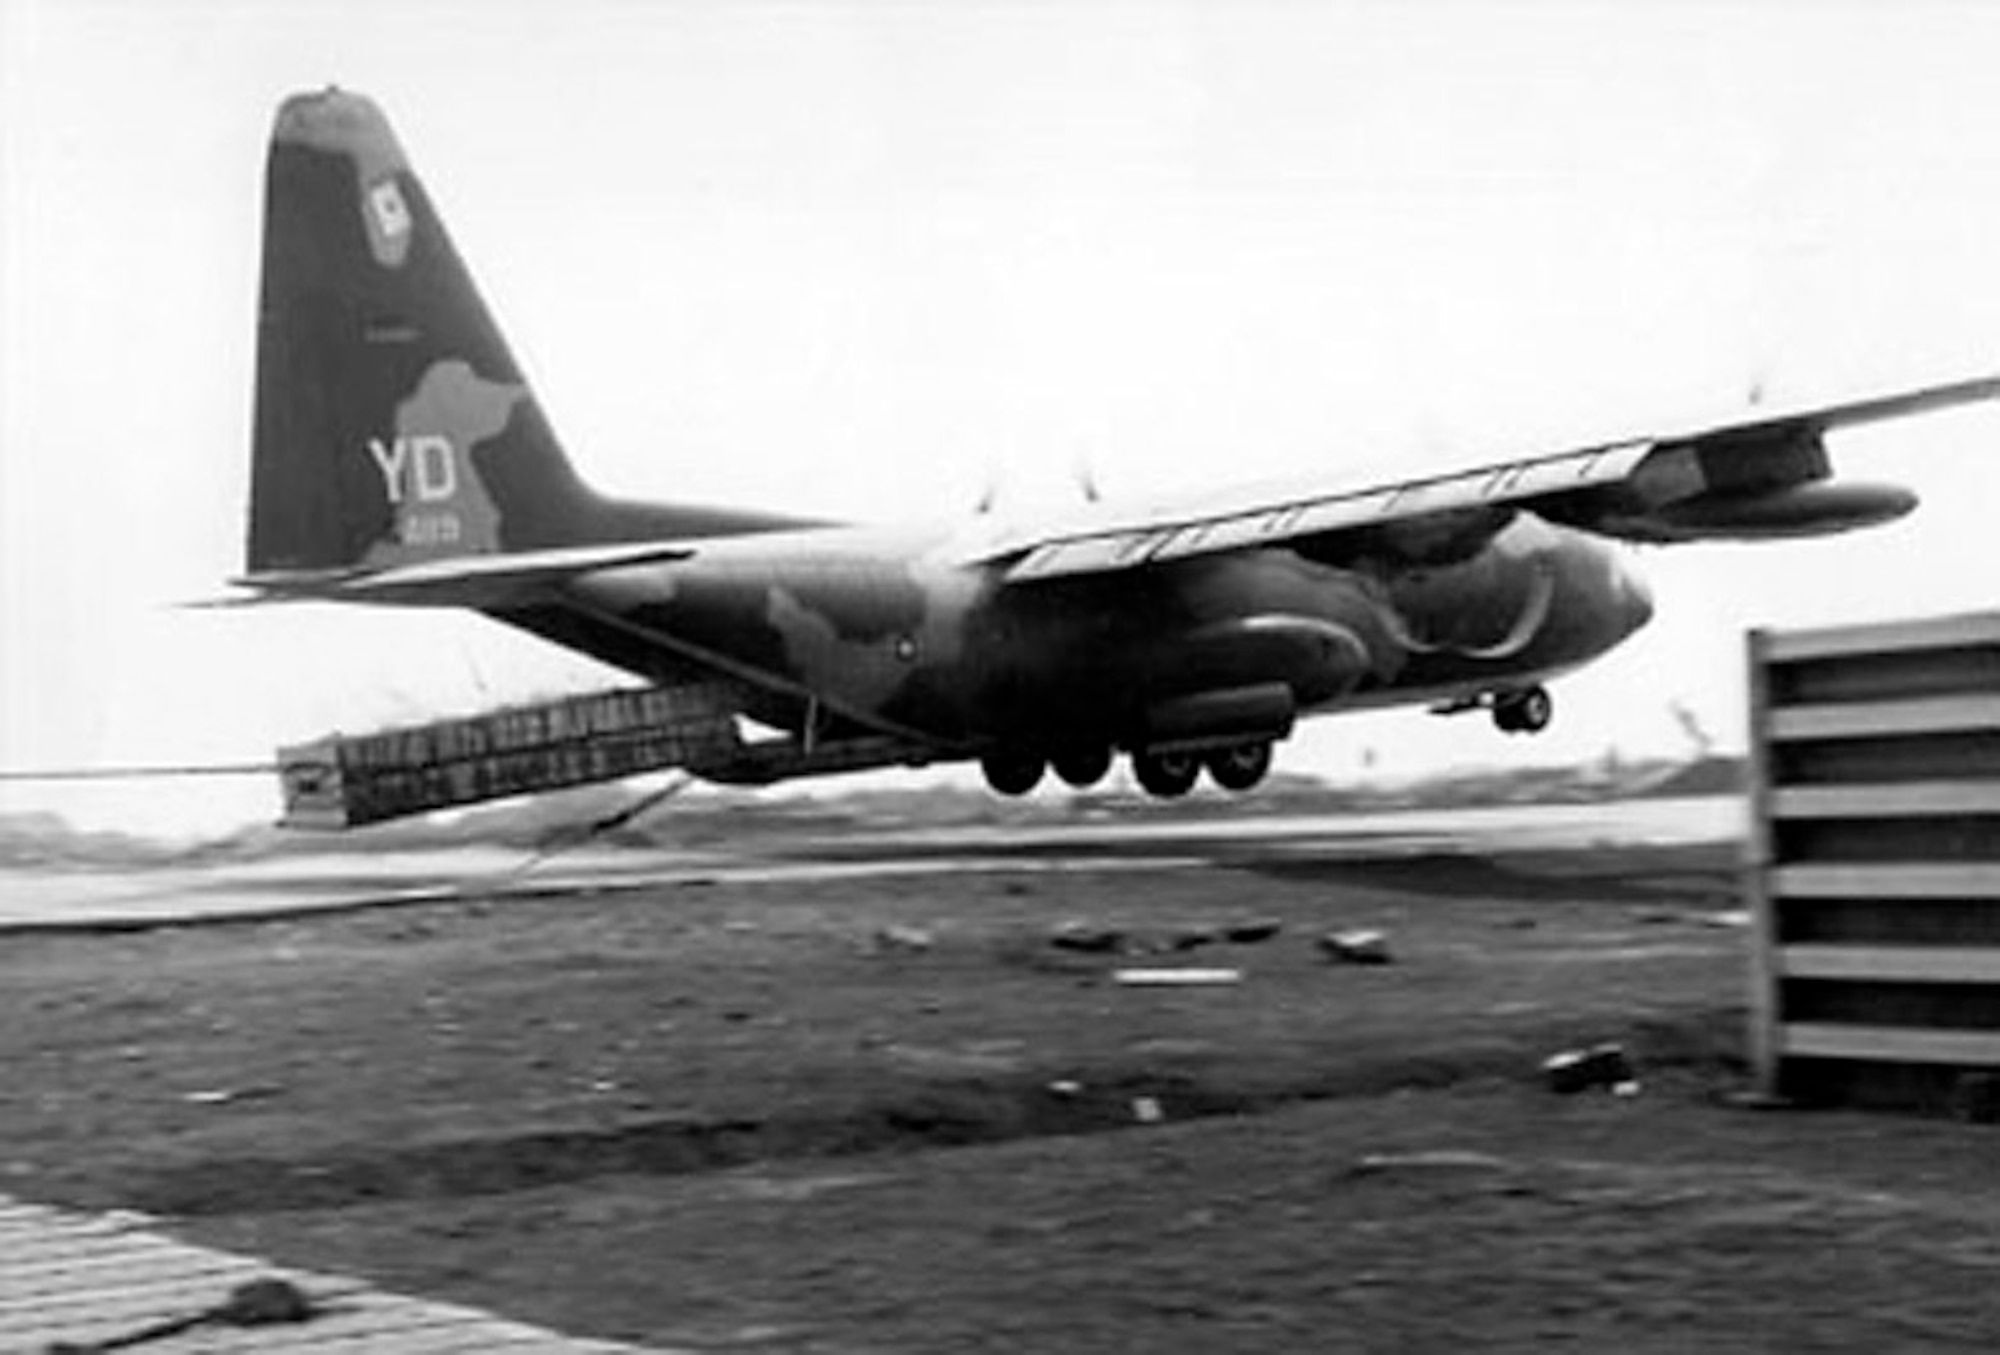 In Vietnam in 1968, C-130 Hercules aircraft resupplied the besieged Marine garrison at Khe Sanh. Exposed to enemy fire, C-130s often flew in low to drop pallets of desperately needed supplies, as seen here. (Courtesy photo)
